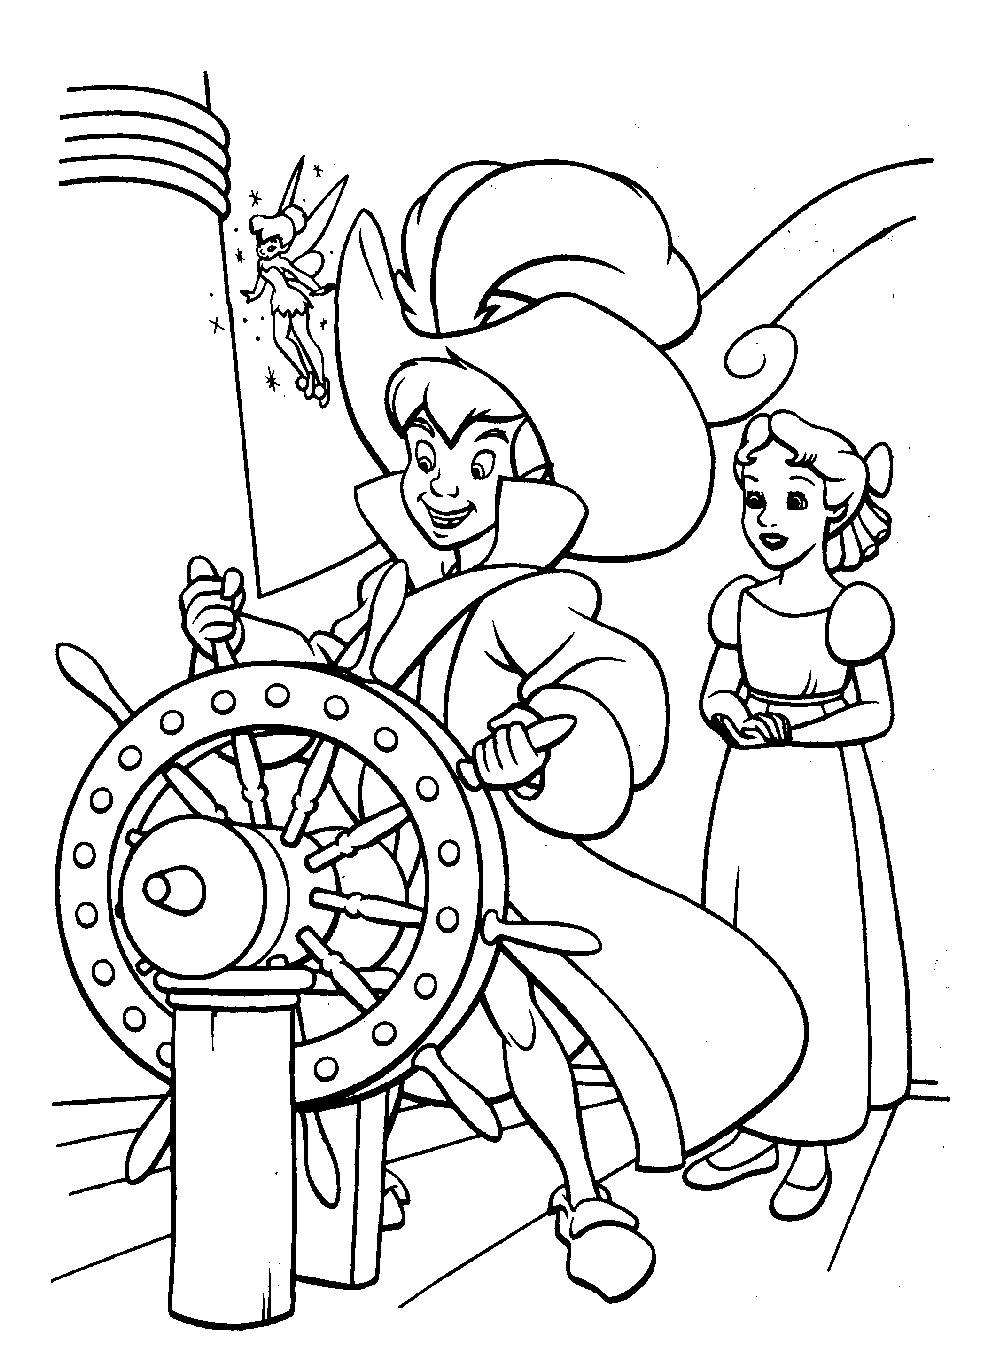 Peter Pan Captain Of The Ship coloring page